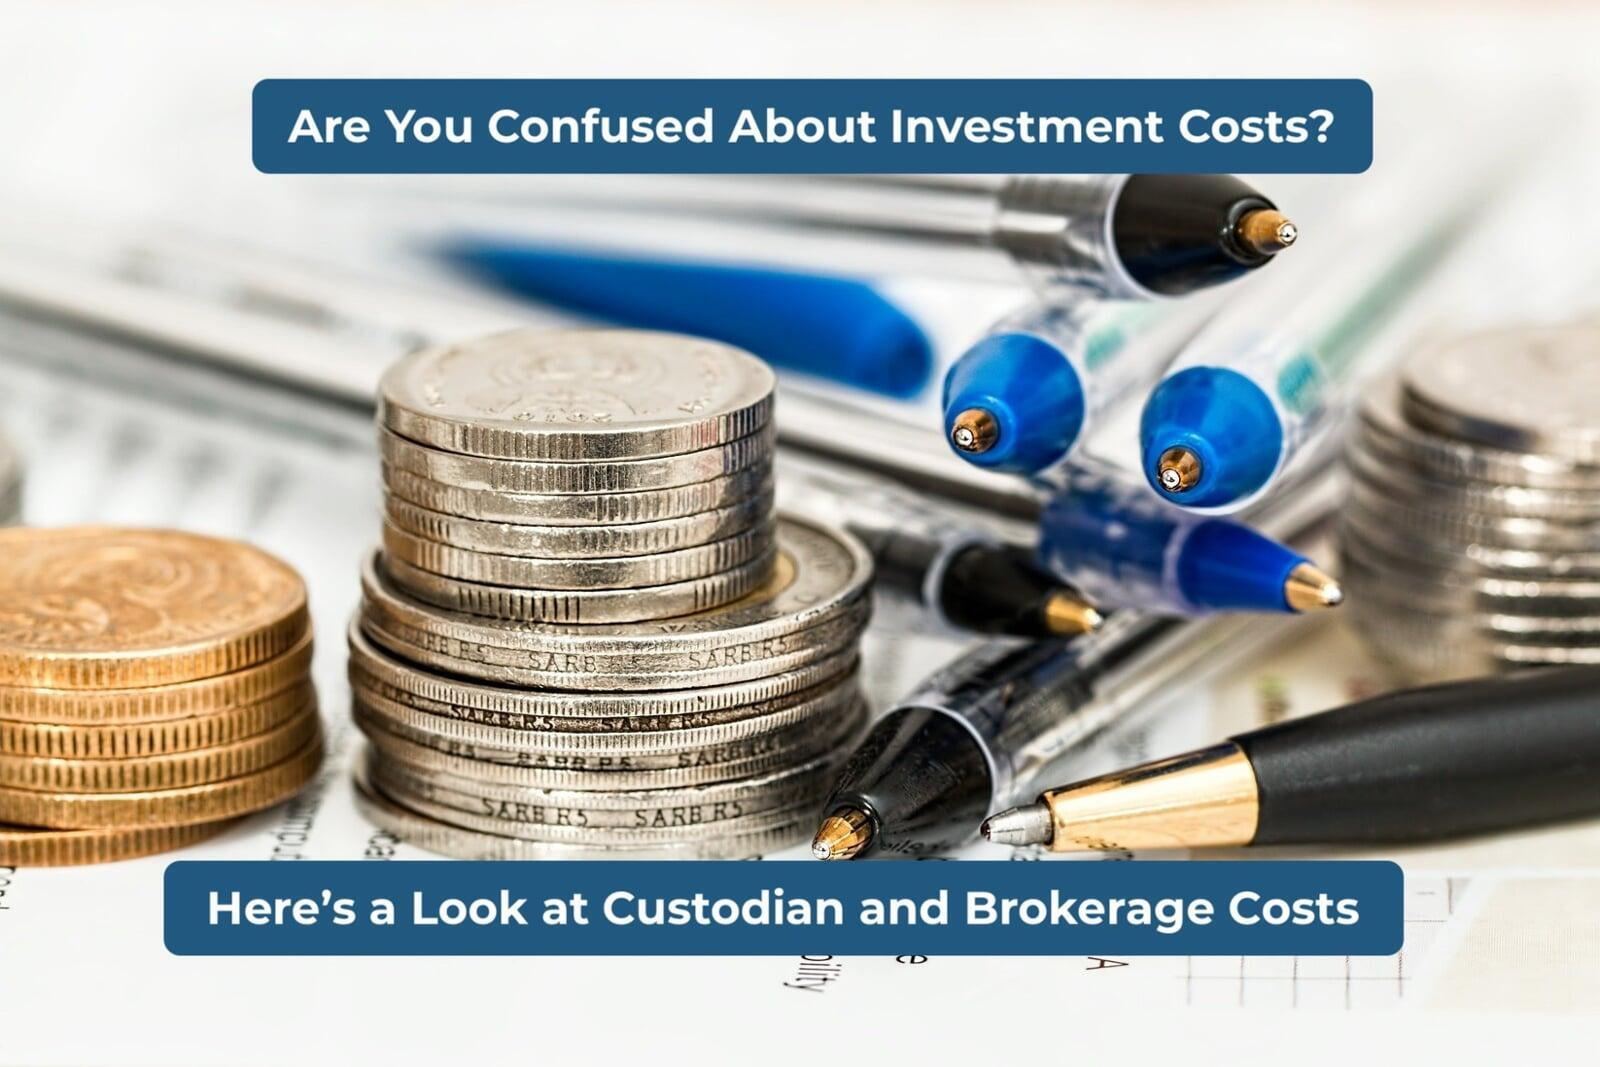 Are You Confused About Investment Costs? Part 2: Custodian/Brokerage Costs